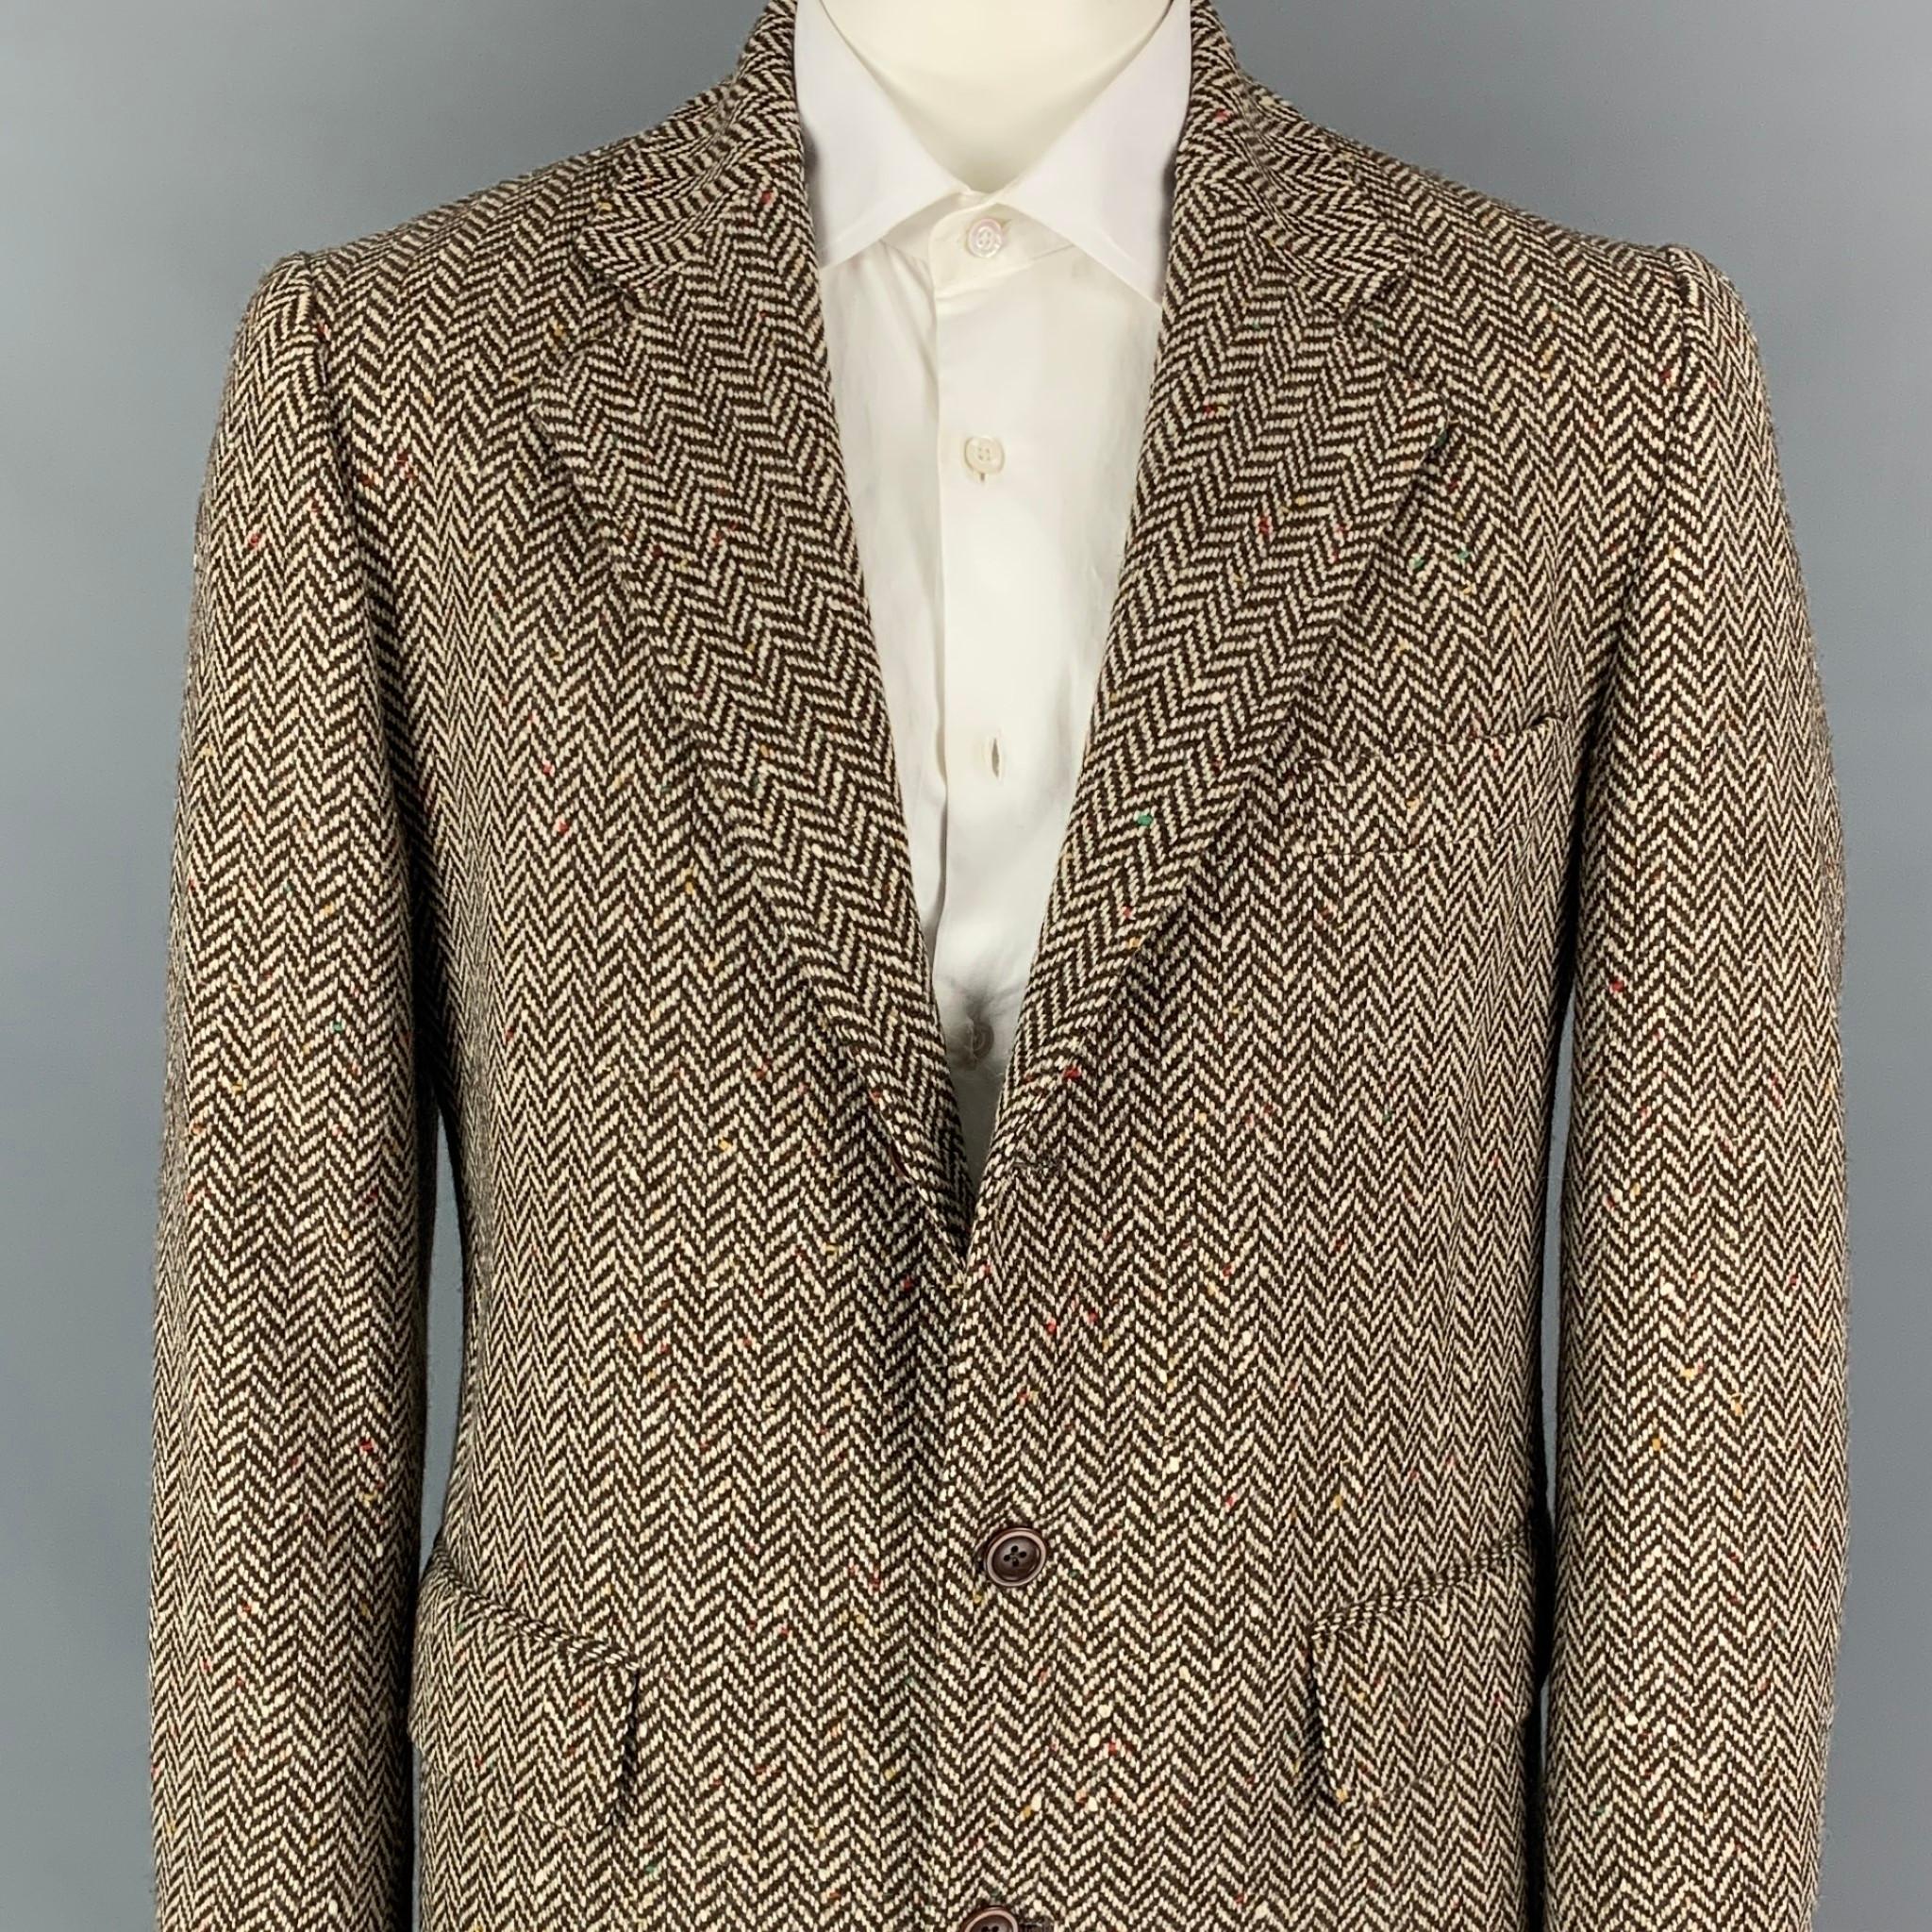 RRL by RALPH LAUREN sport coat comes in a brown & beige herringbone wool with a full liner featuring a notch lapel, flap pockets, and a three button closure. Made in USA. 

Very Good Pre-Owned Condition.
Marked: L

Measurements:

Shoulder: 18.5